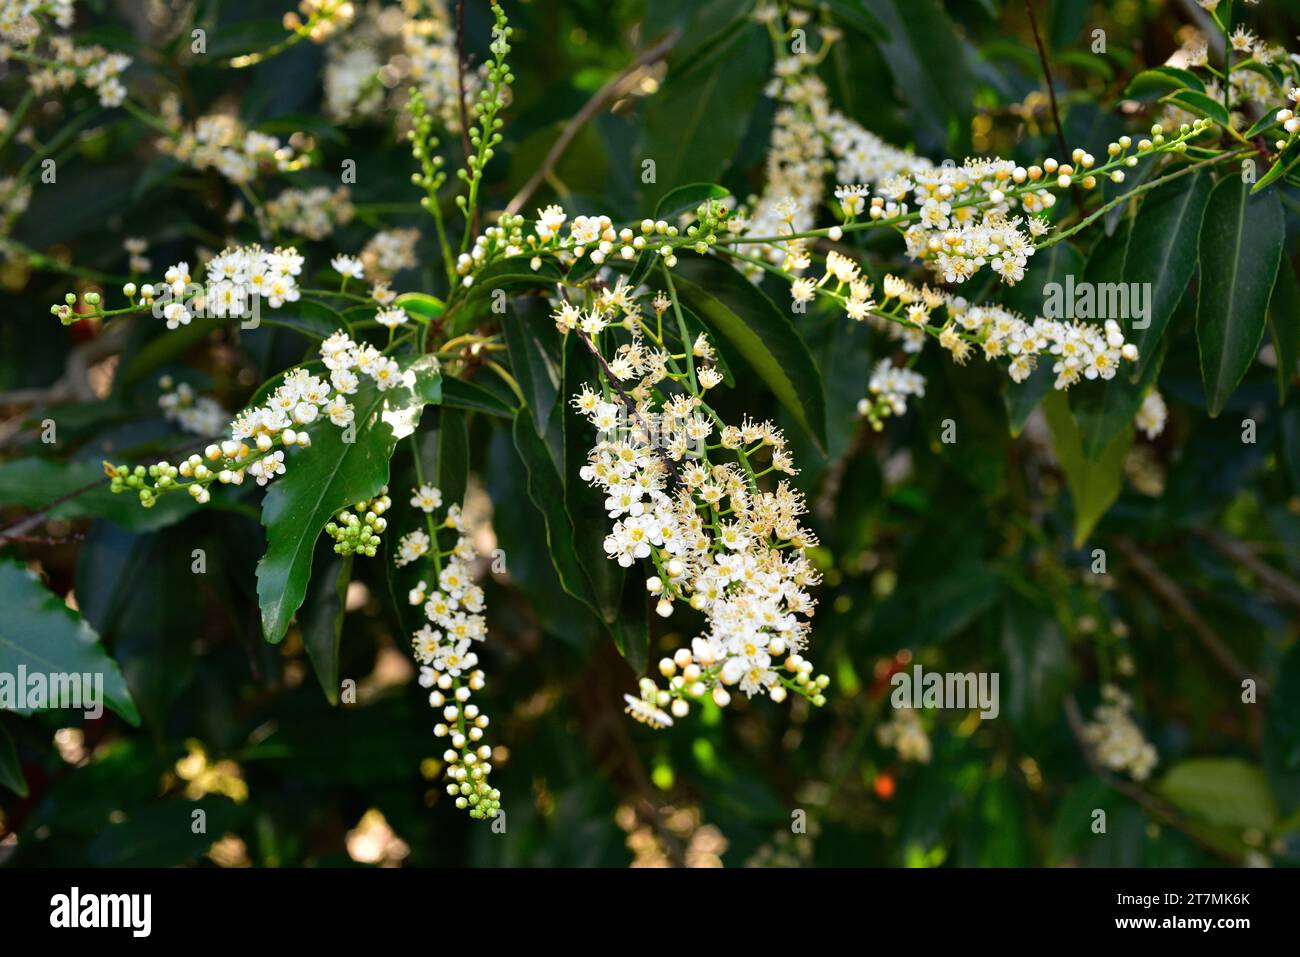 Portugal laurel or hija (Prunus lusitanica) is an evergreen small tree Native to Spain, Portugal, southwestern France, Morocco and Macaronesia. Stock Photo